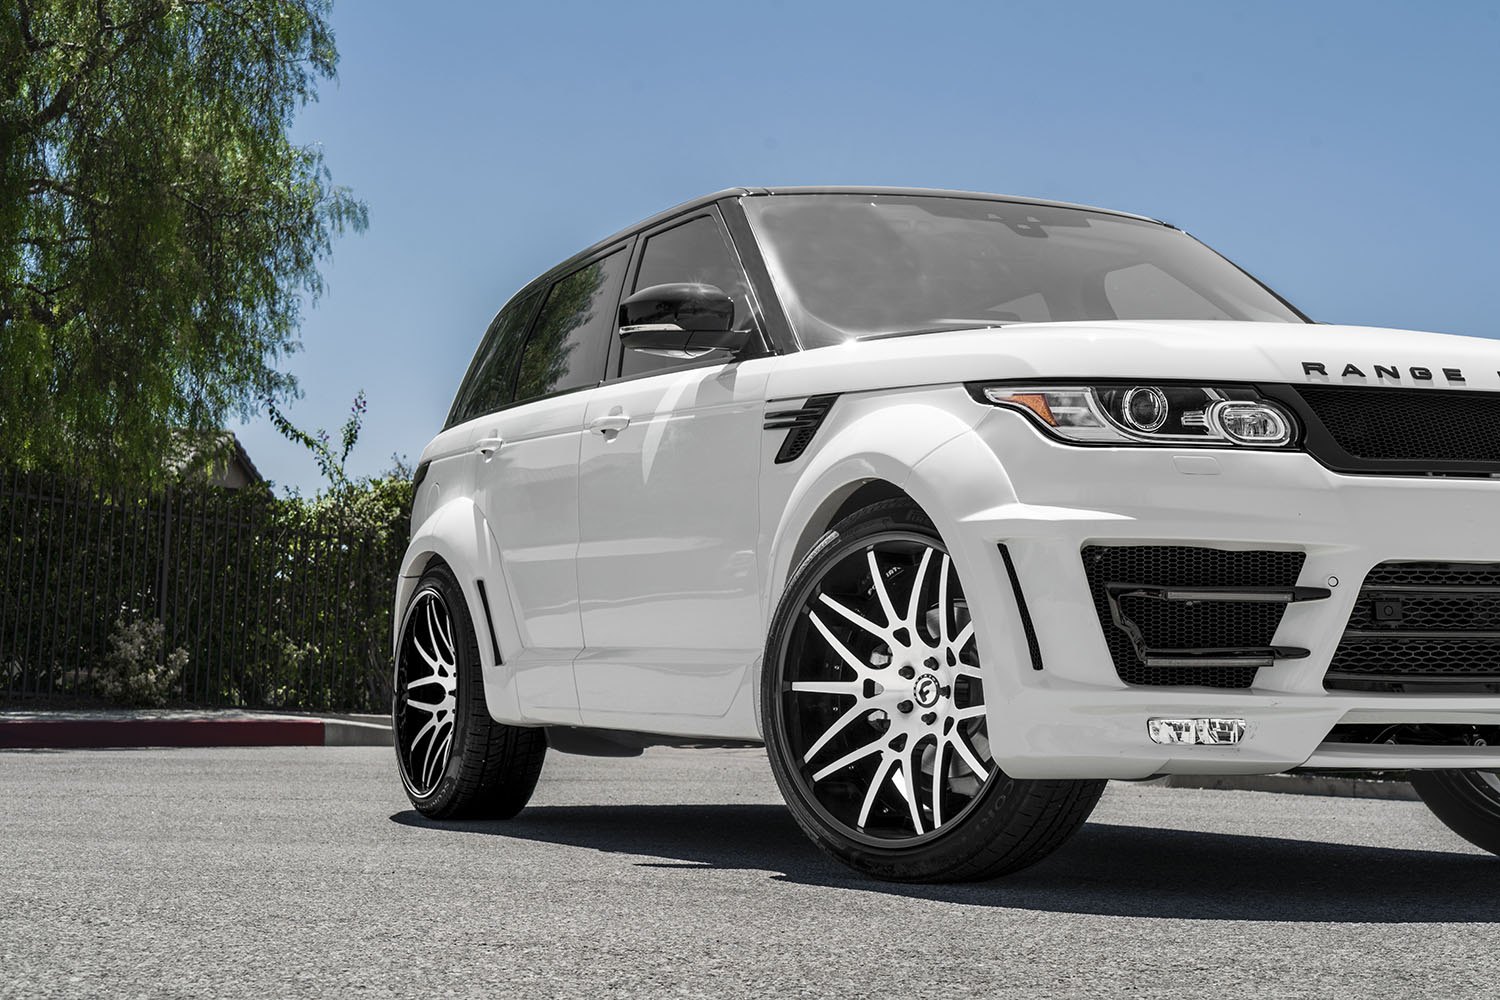 Aftermarket Side Scoops on White Range Rover Sport - Photo by Forgiato